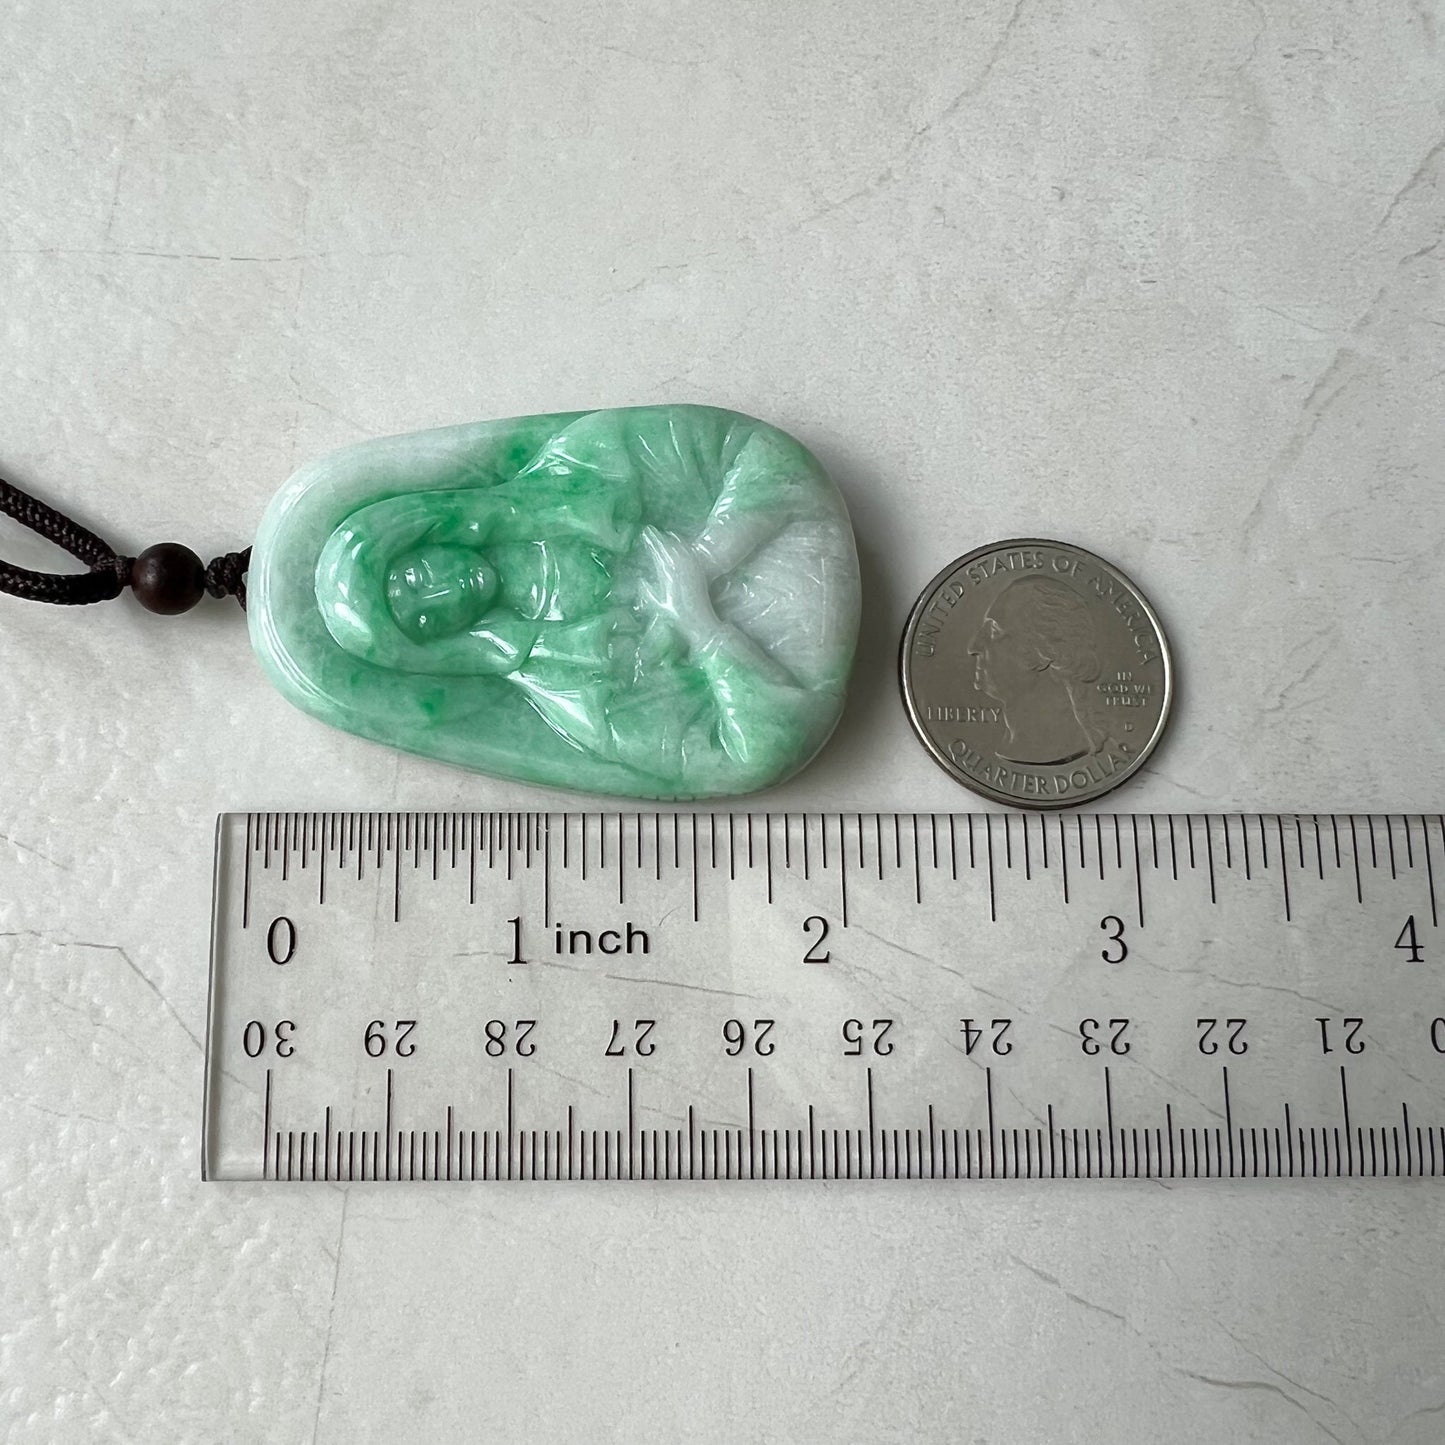 Jadeite Jade Virgin Mary, Mother of Jesus, Green Jade, Hand Carved Necklace, QT-0322-1652803419 - AriaDesignCollection